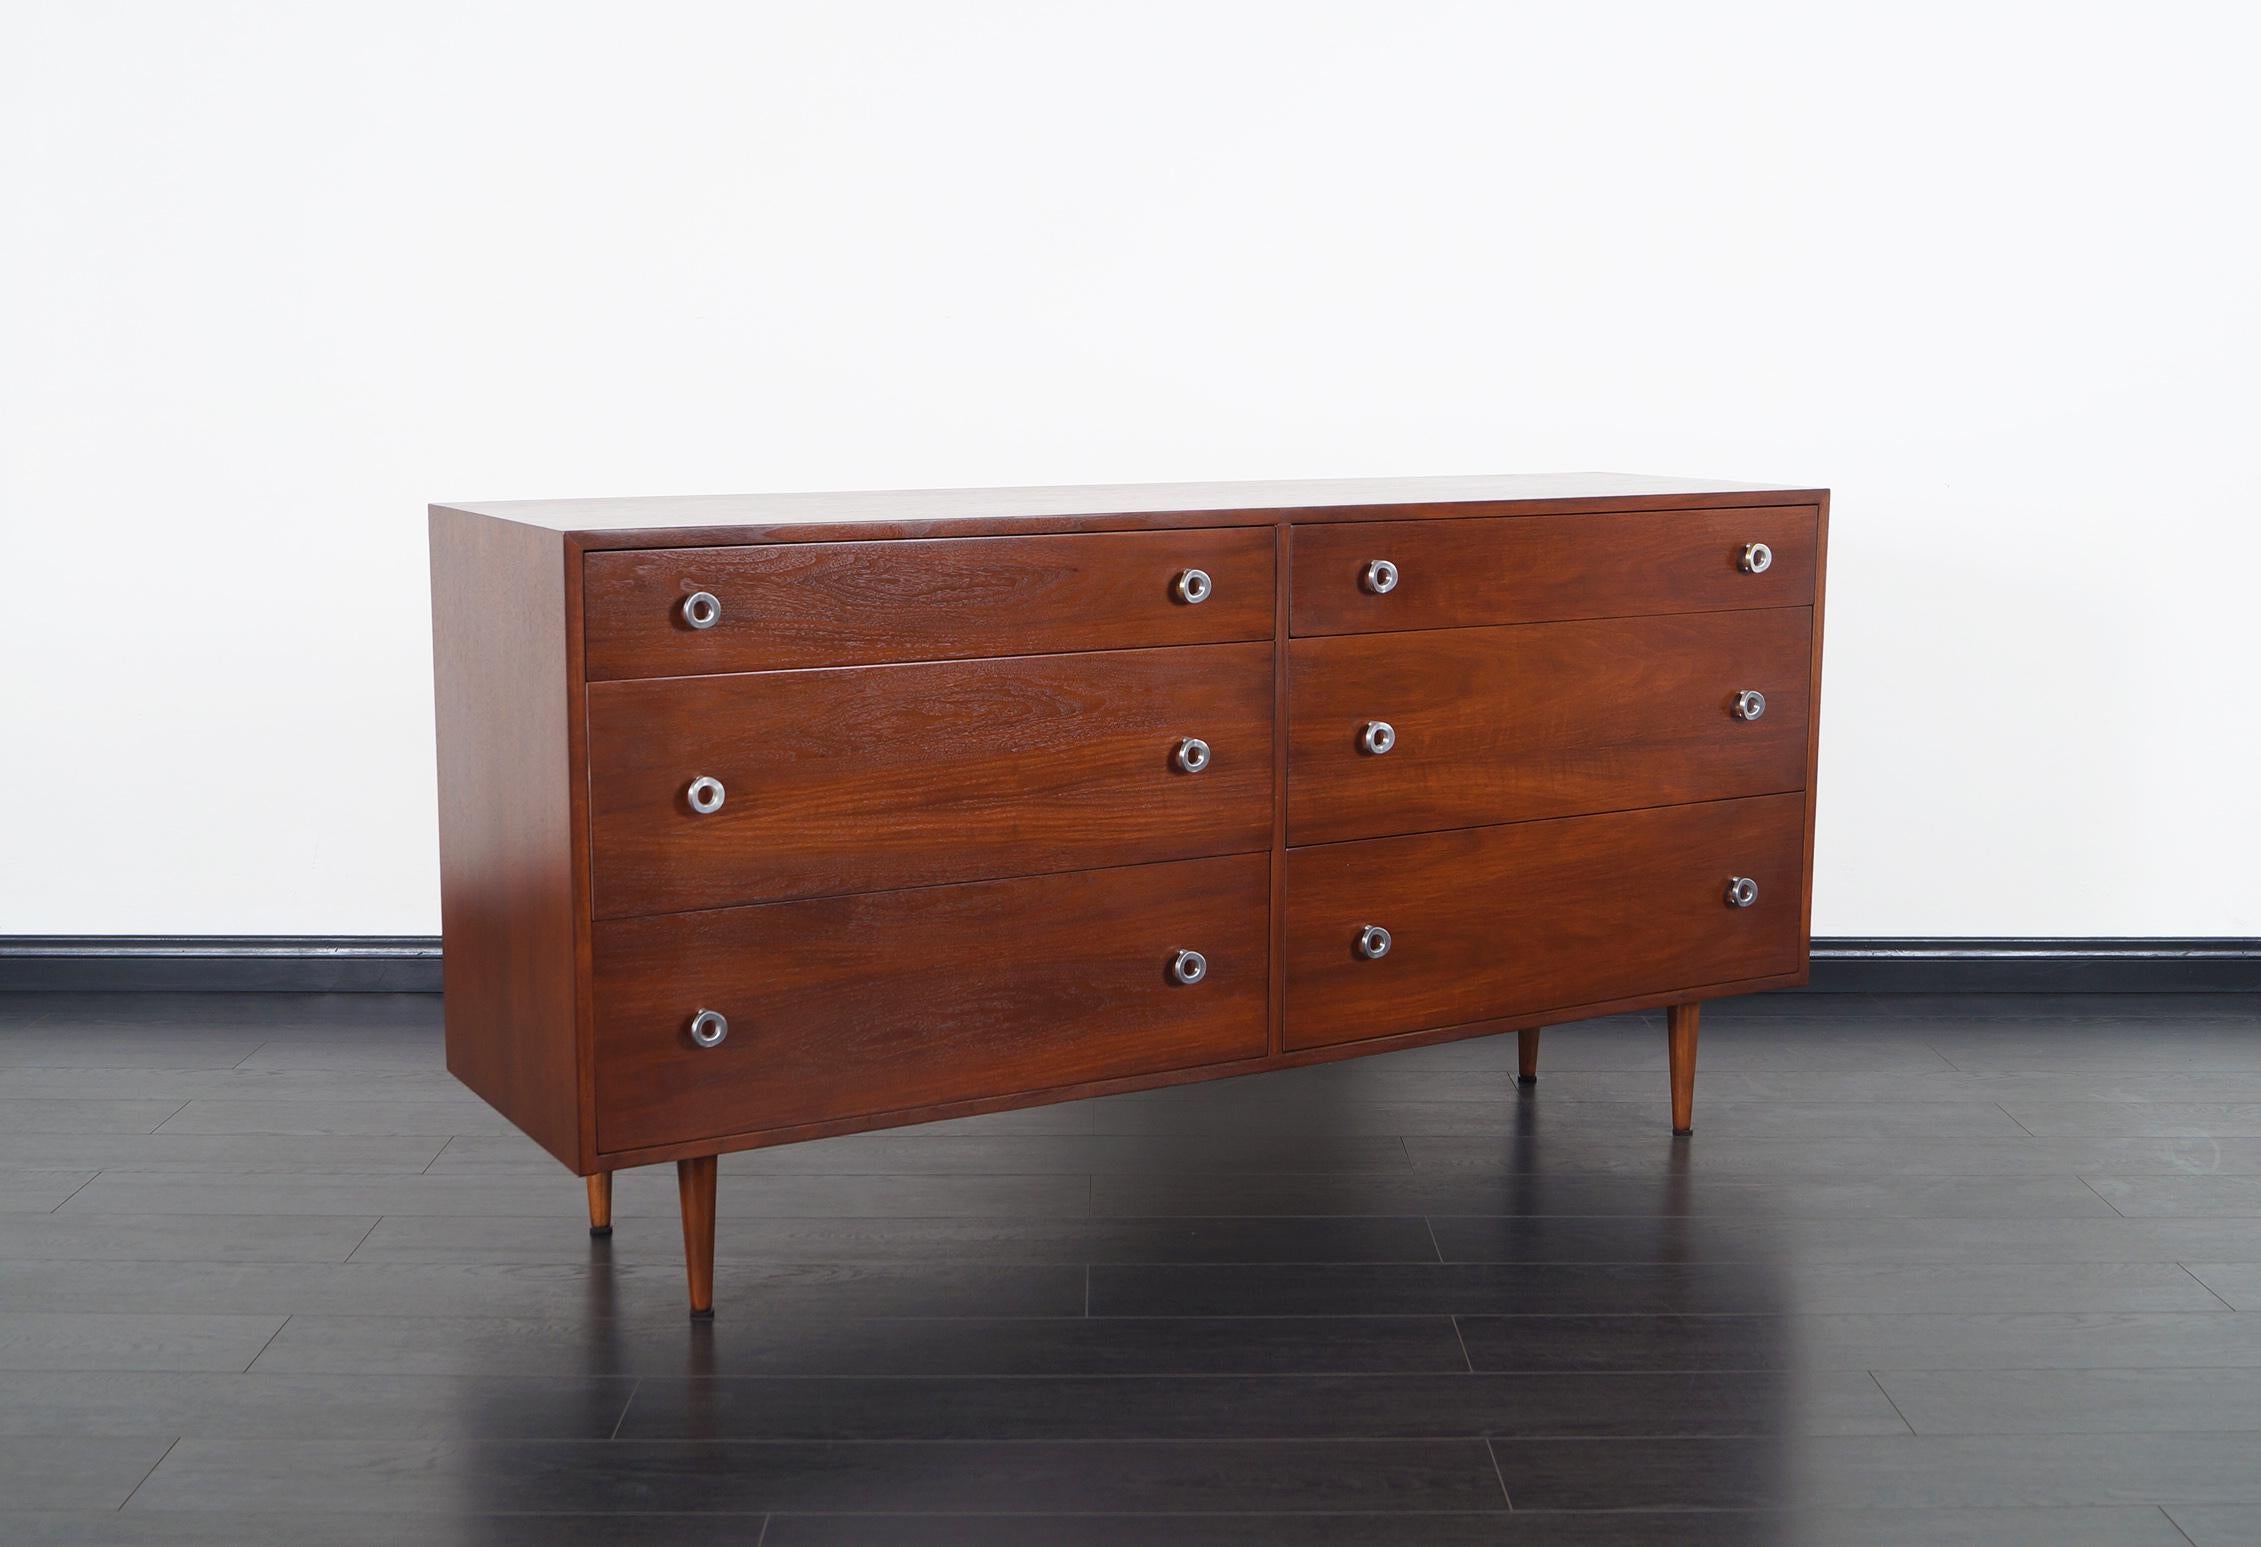 Vintage walnut dresser designed by Swedish architect Greta M. Grossman for Glenn of California. This iconic modern design is comprised of a walnut case that sits on four tapered legs featuring six dovetailed drawers. Each drawer features Grossman's